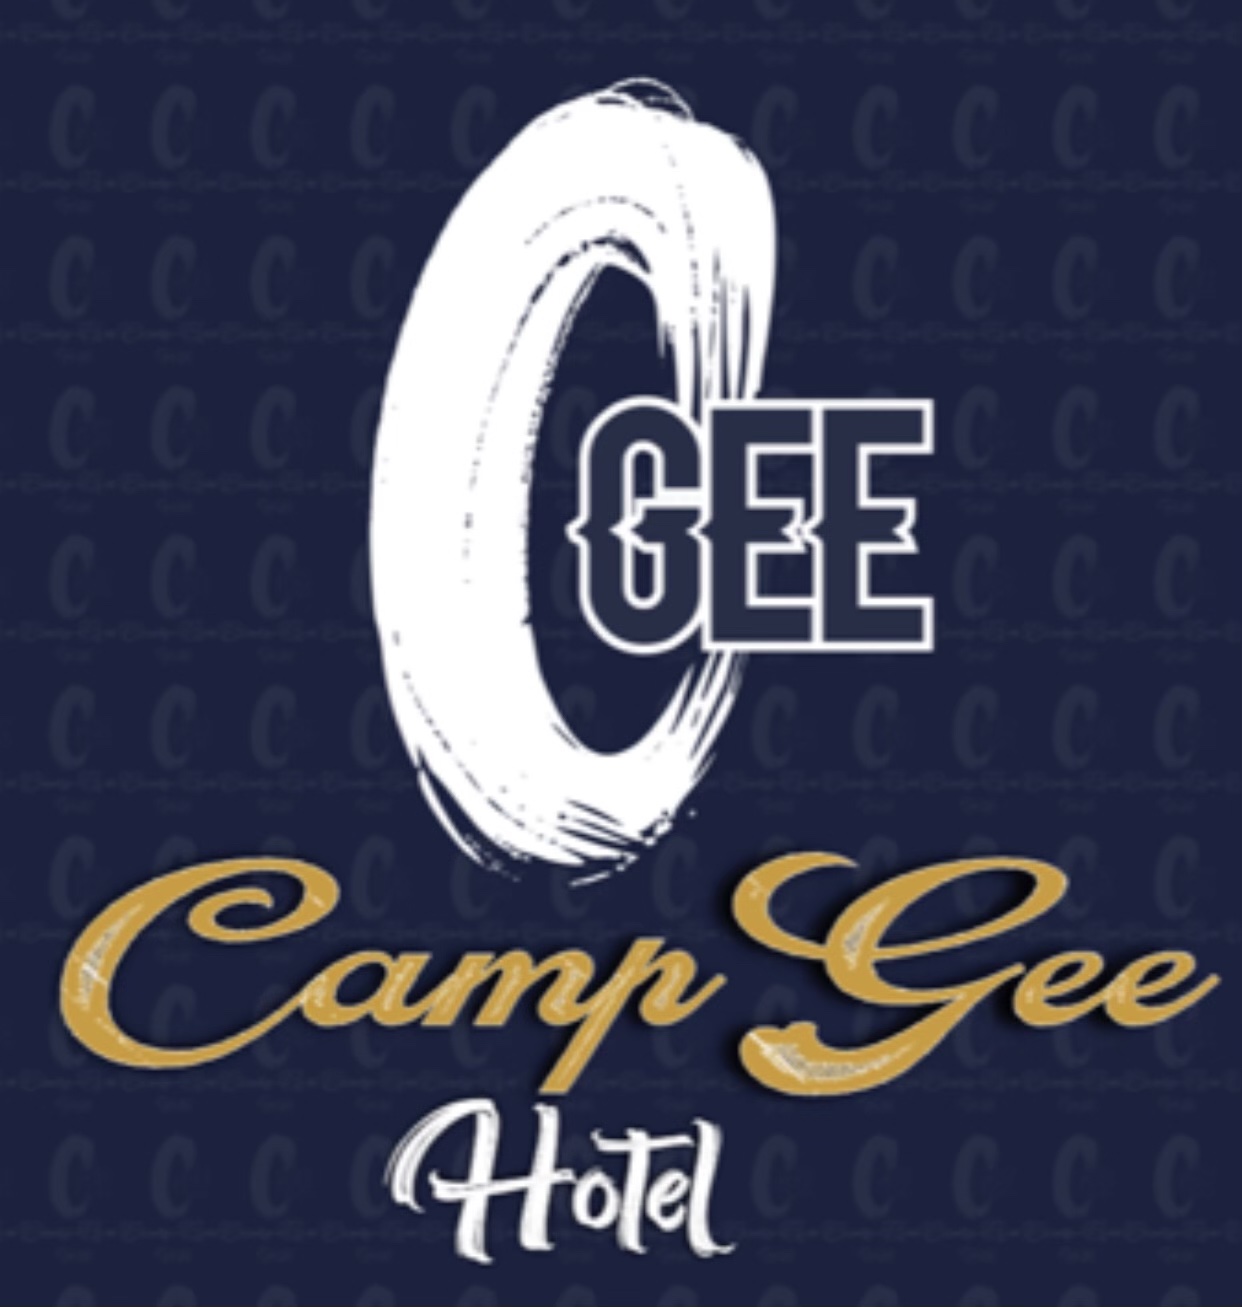 Camp Gee Hotel